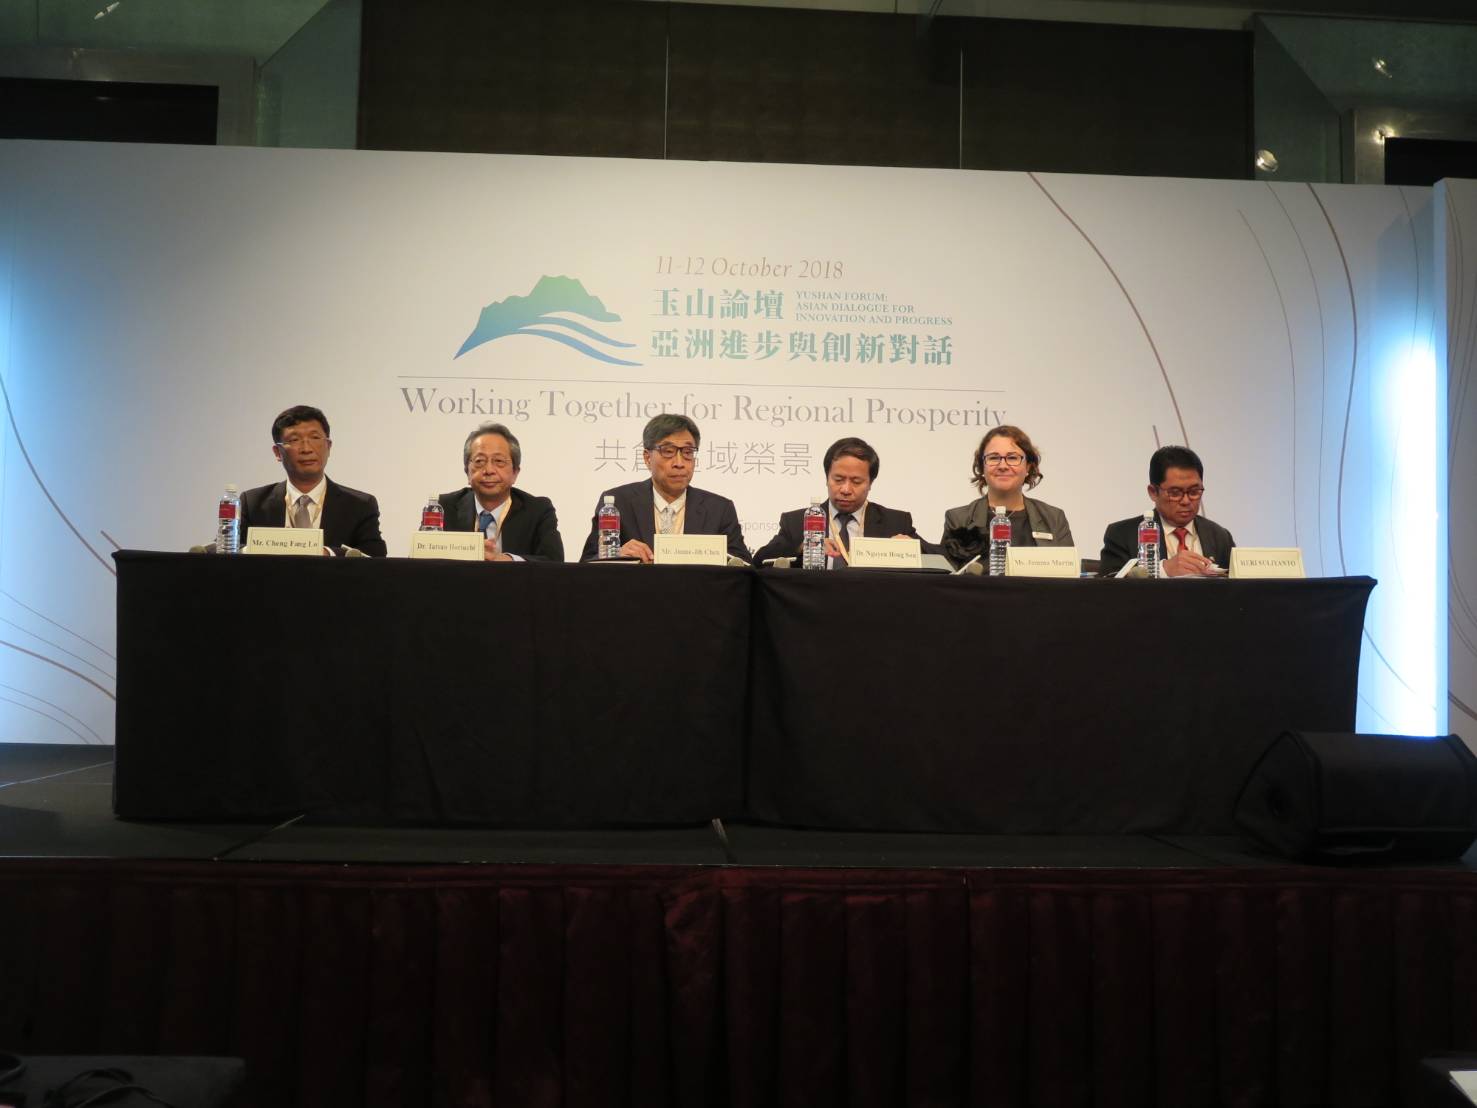 Speakers at the agricultural session of the 2018 Yushan Forum.